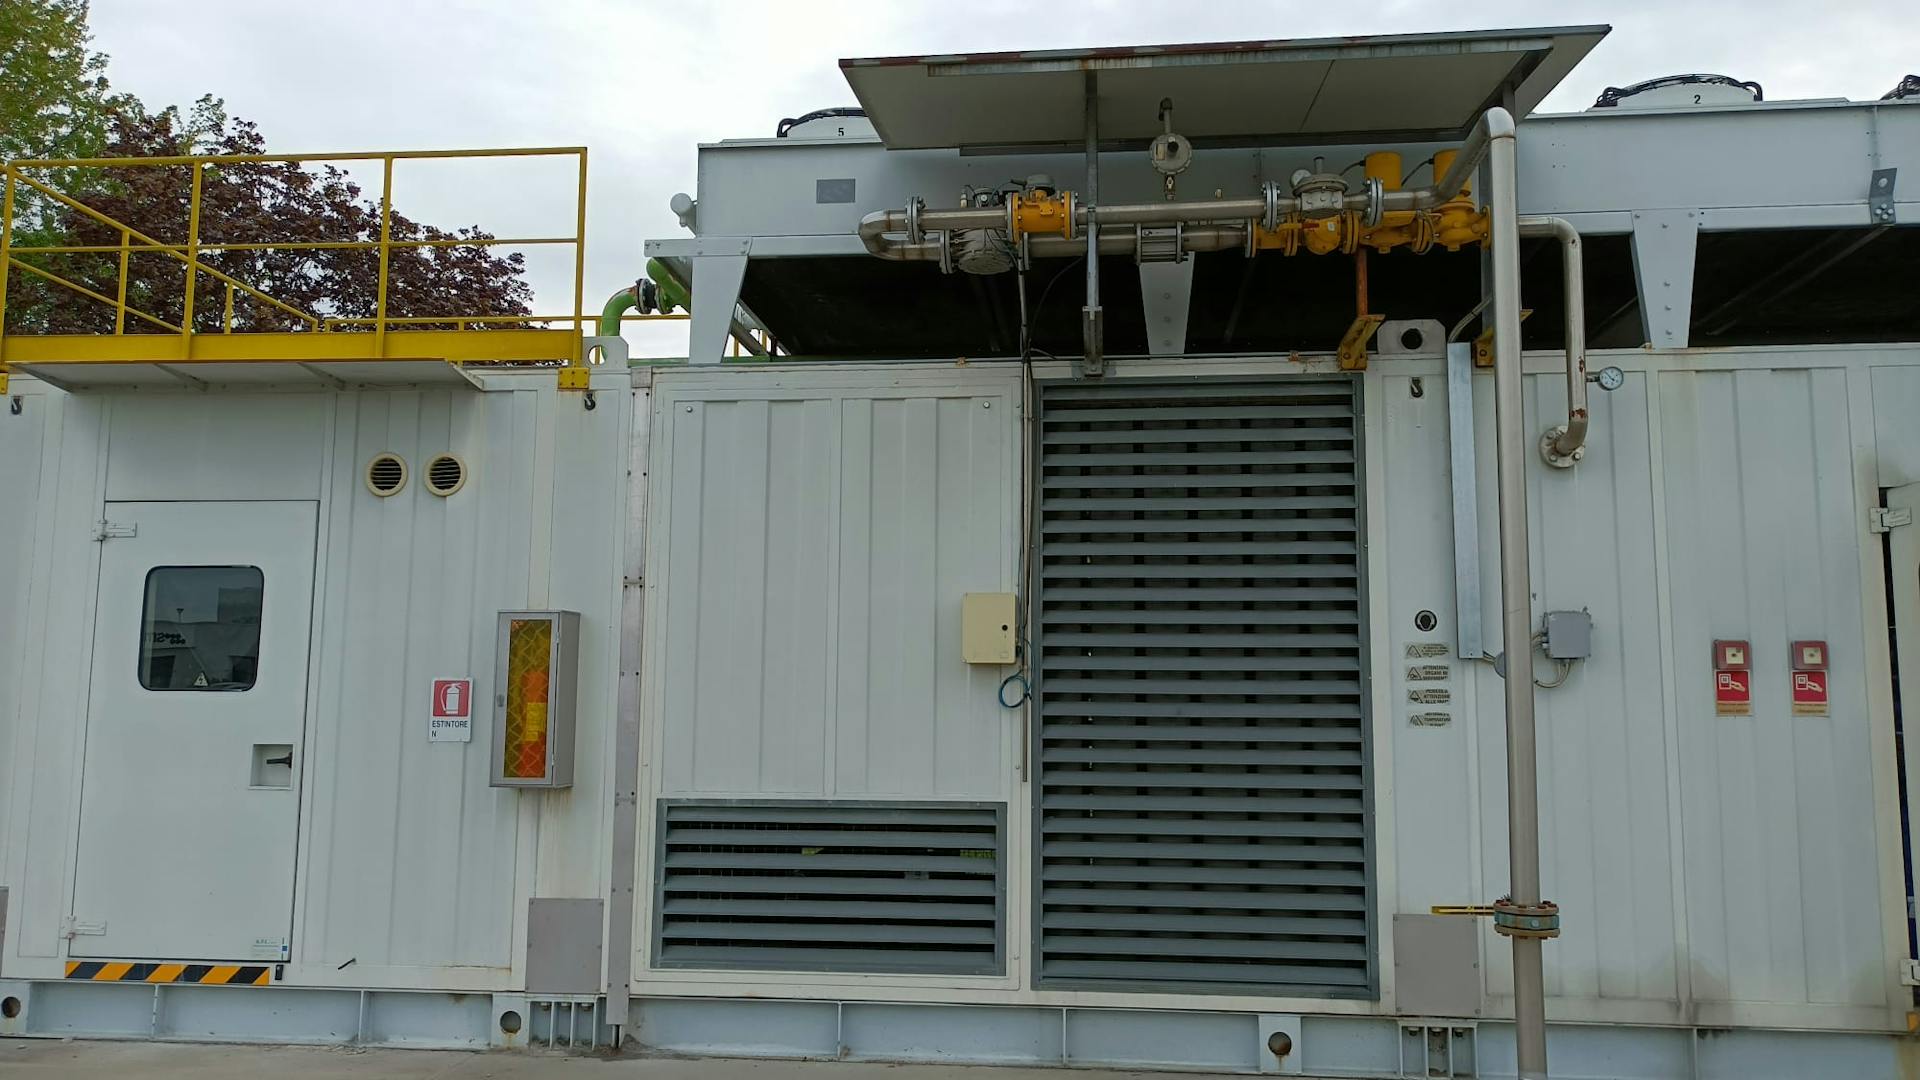 MWM2016 10Image of Deutz MWM2016 V16 natural gas complete containerised genset showing exterior - industrial generator sales